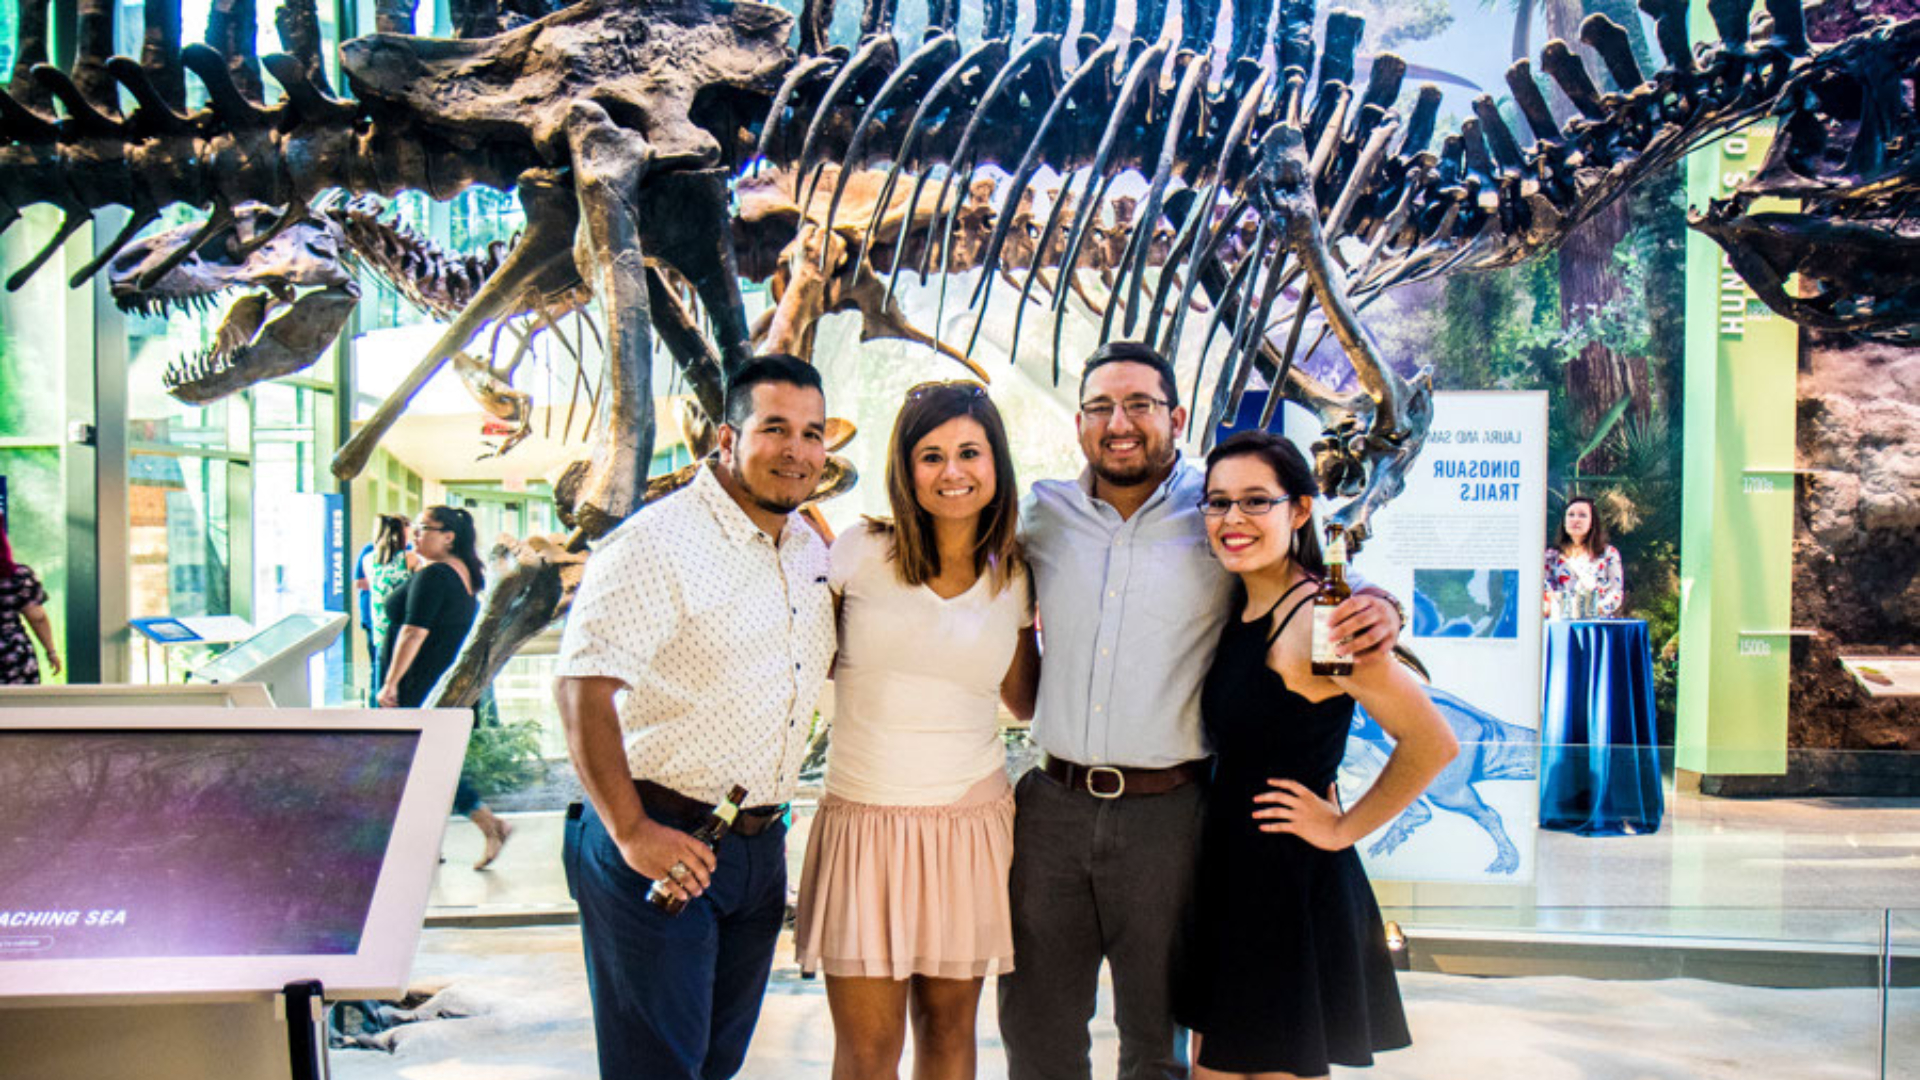 two men and two women standing together and smiling in front of the t.rex. Men are wearing button down short sleeved shirts. Women are wearing tank tops and skirts.